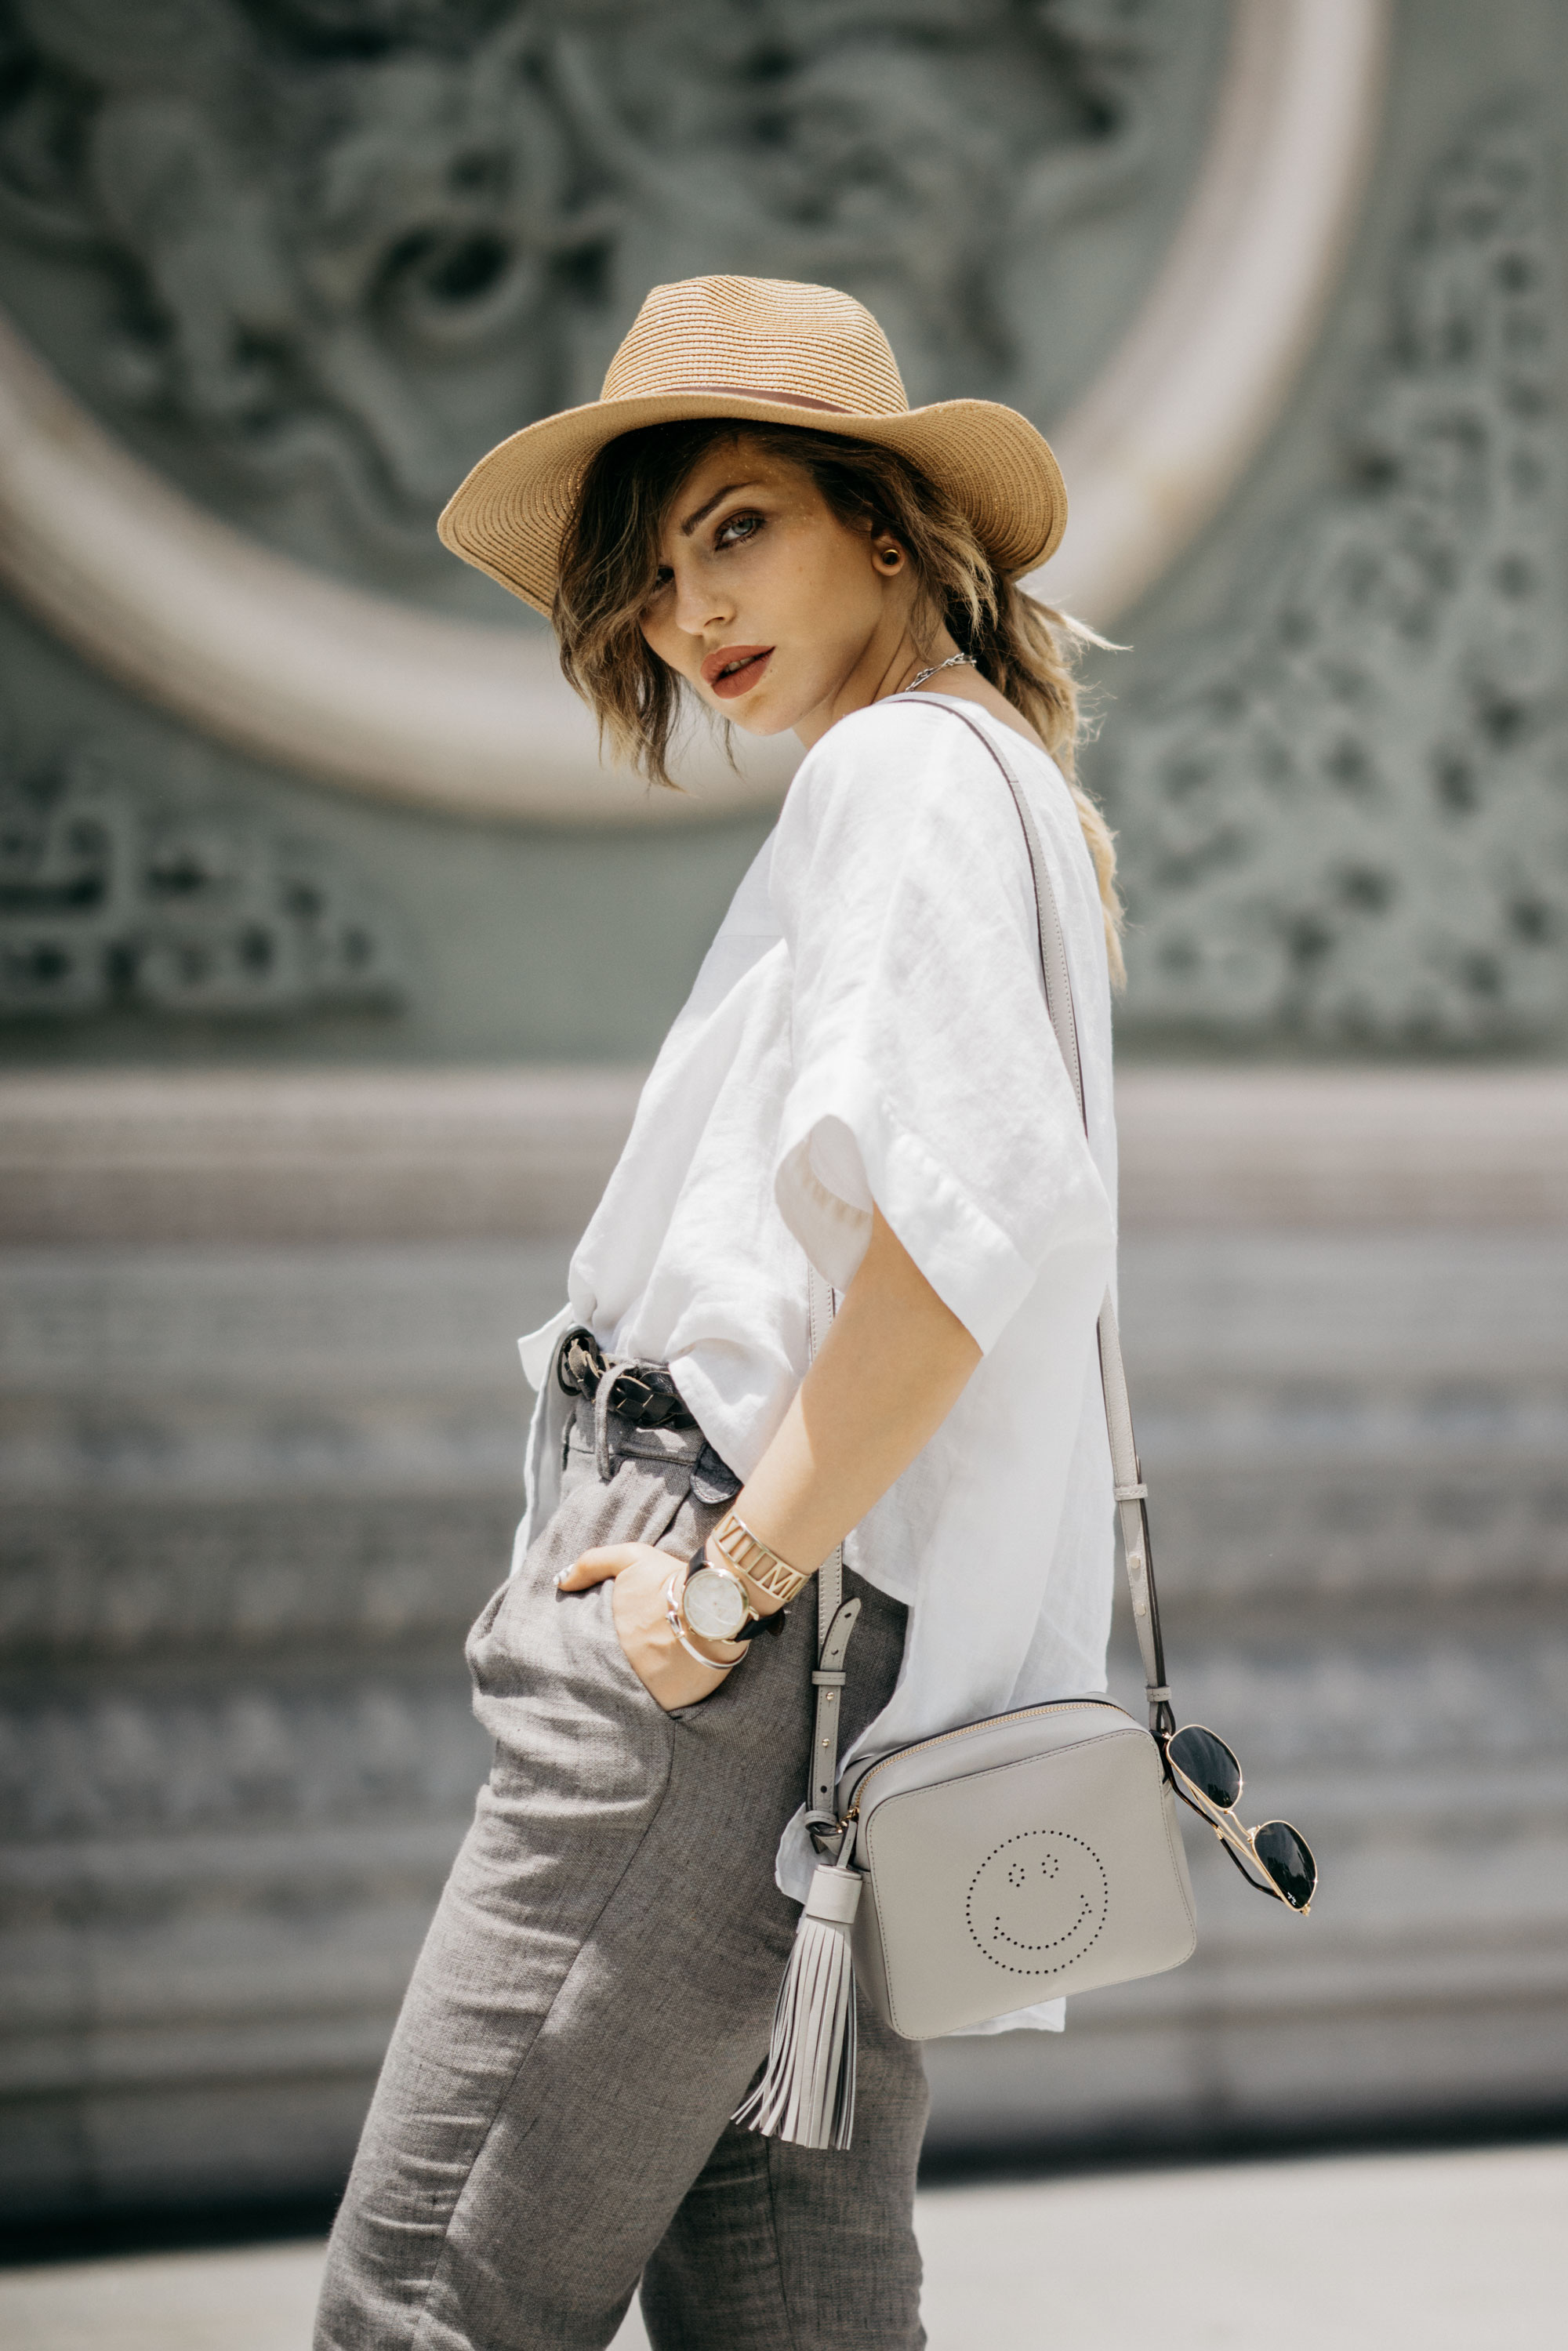 Masha Sedgwick, Slow the world down, Taiwan, Outfit, how to style a white blouse, summer outfit, casual, Berlin fashion blogger